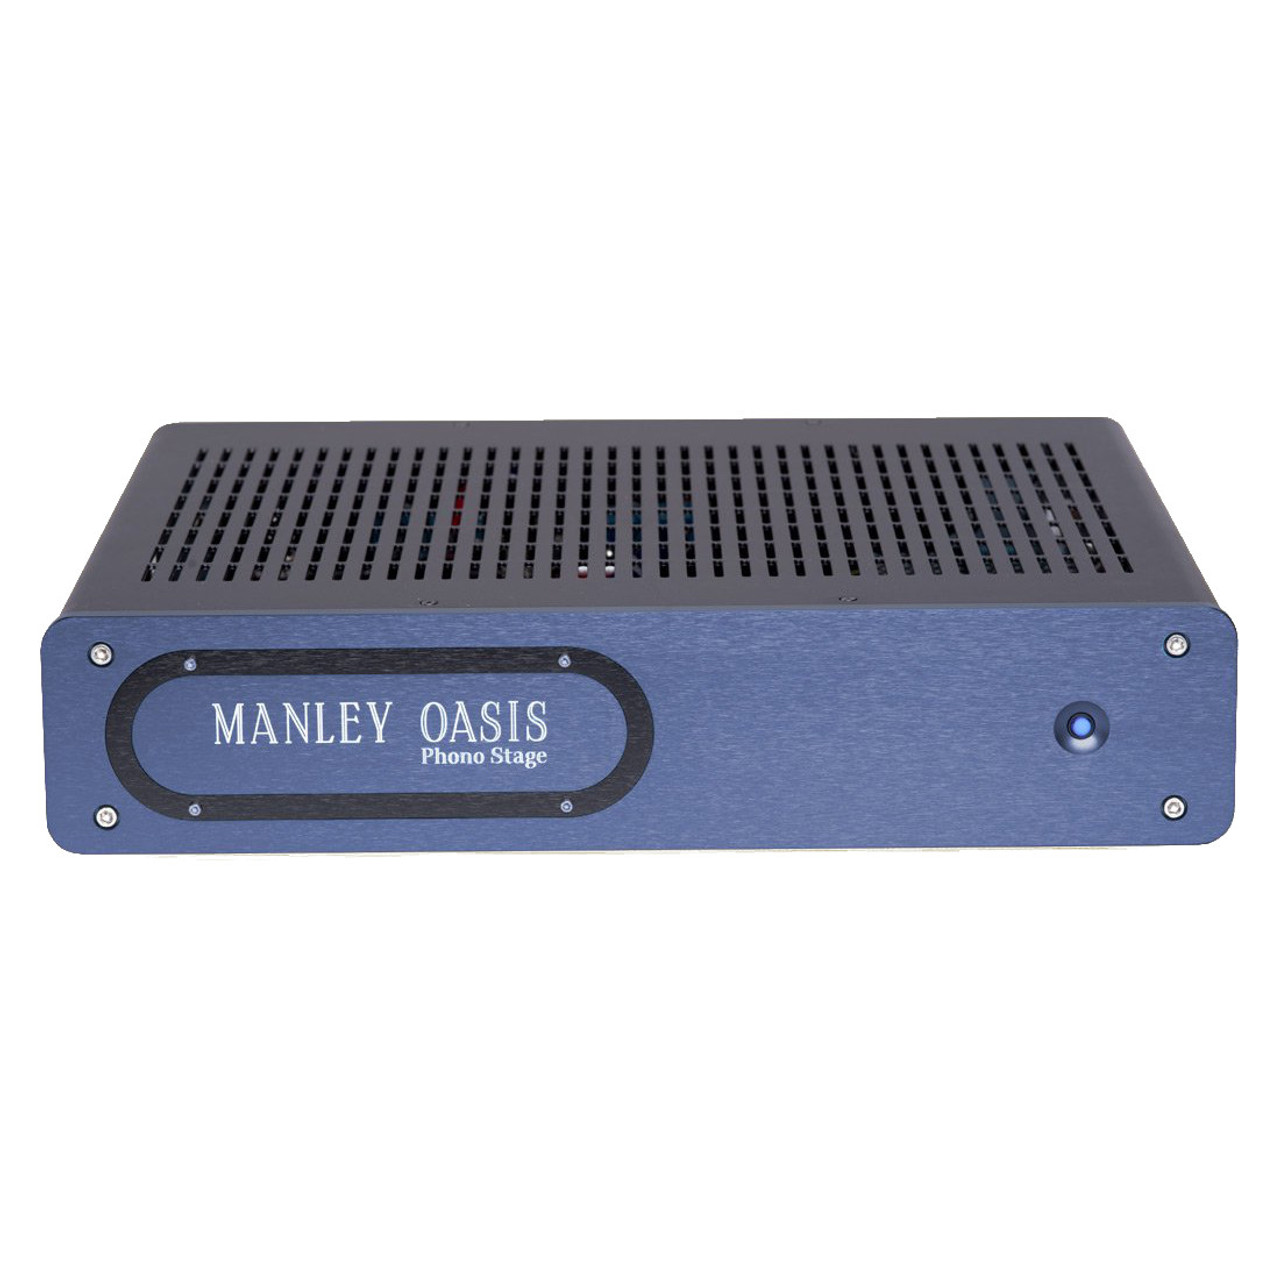 Manley Oasis phono stage